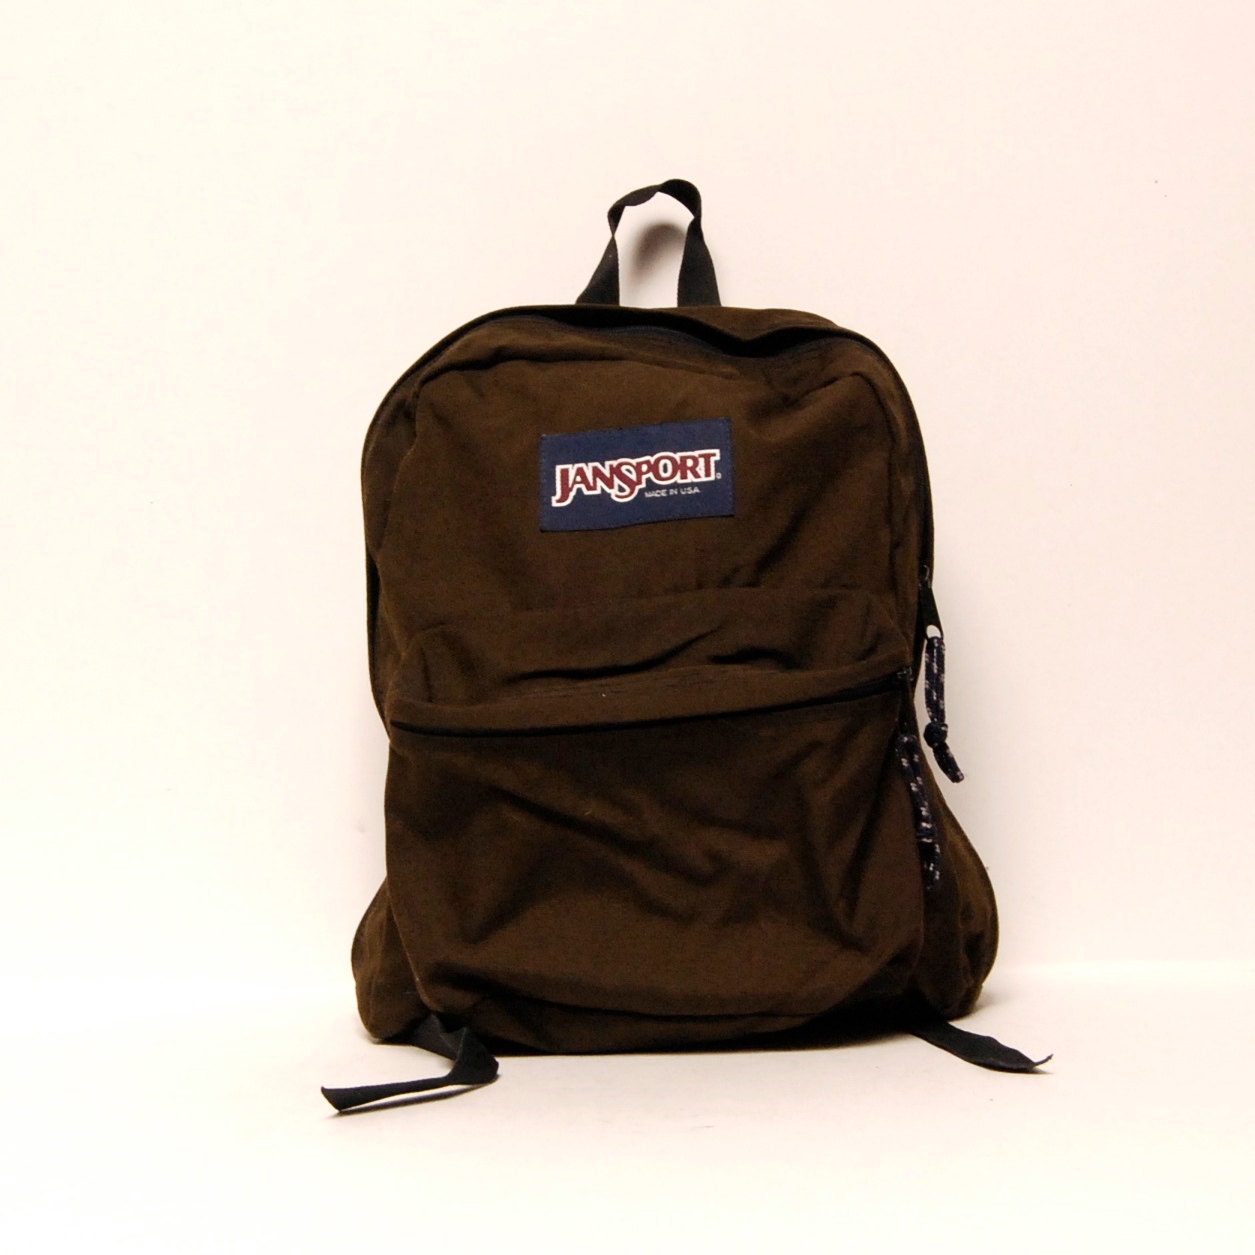 BROWN JANSPORT canvas classic BACKPACK made in usa by CairoVintage